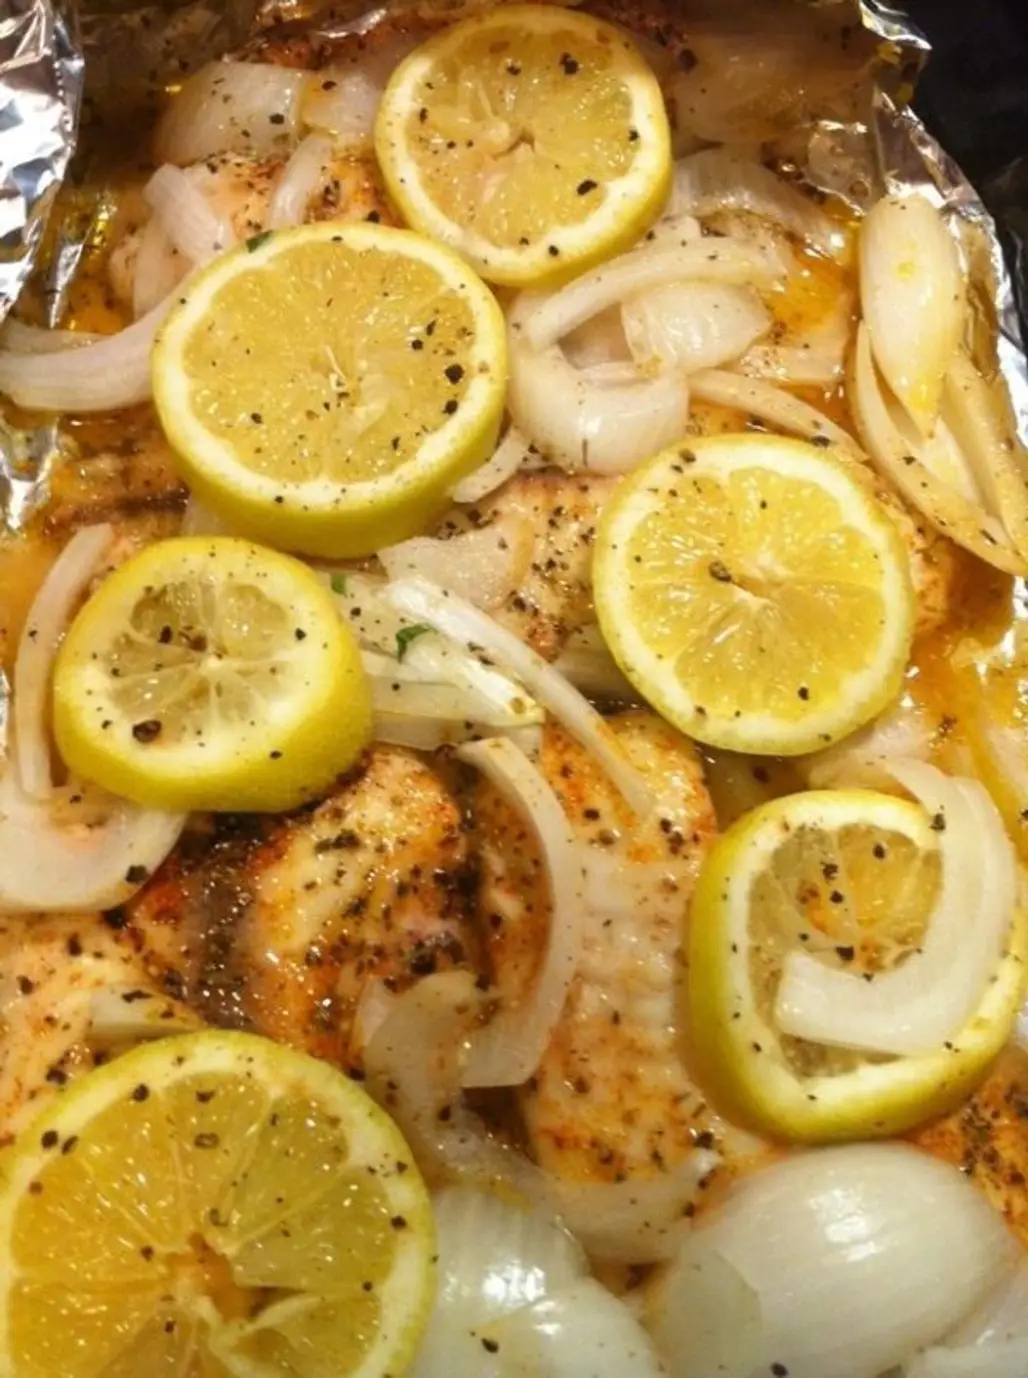 Baked Tilapia with Lemon and Onions